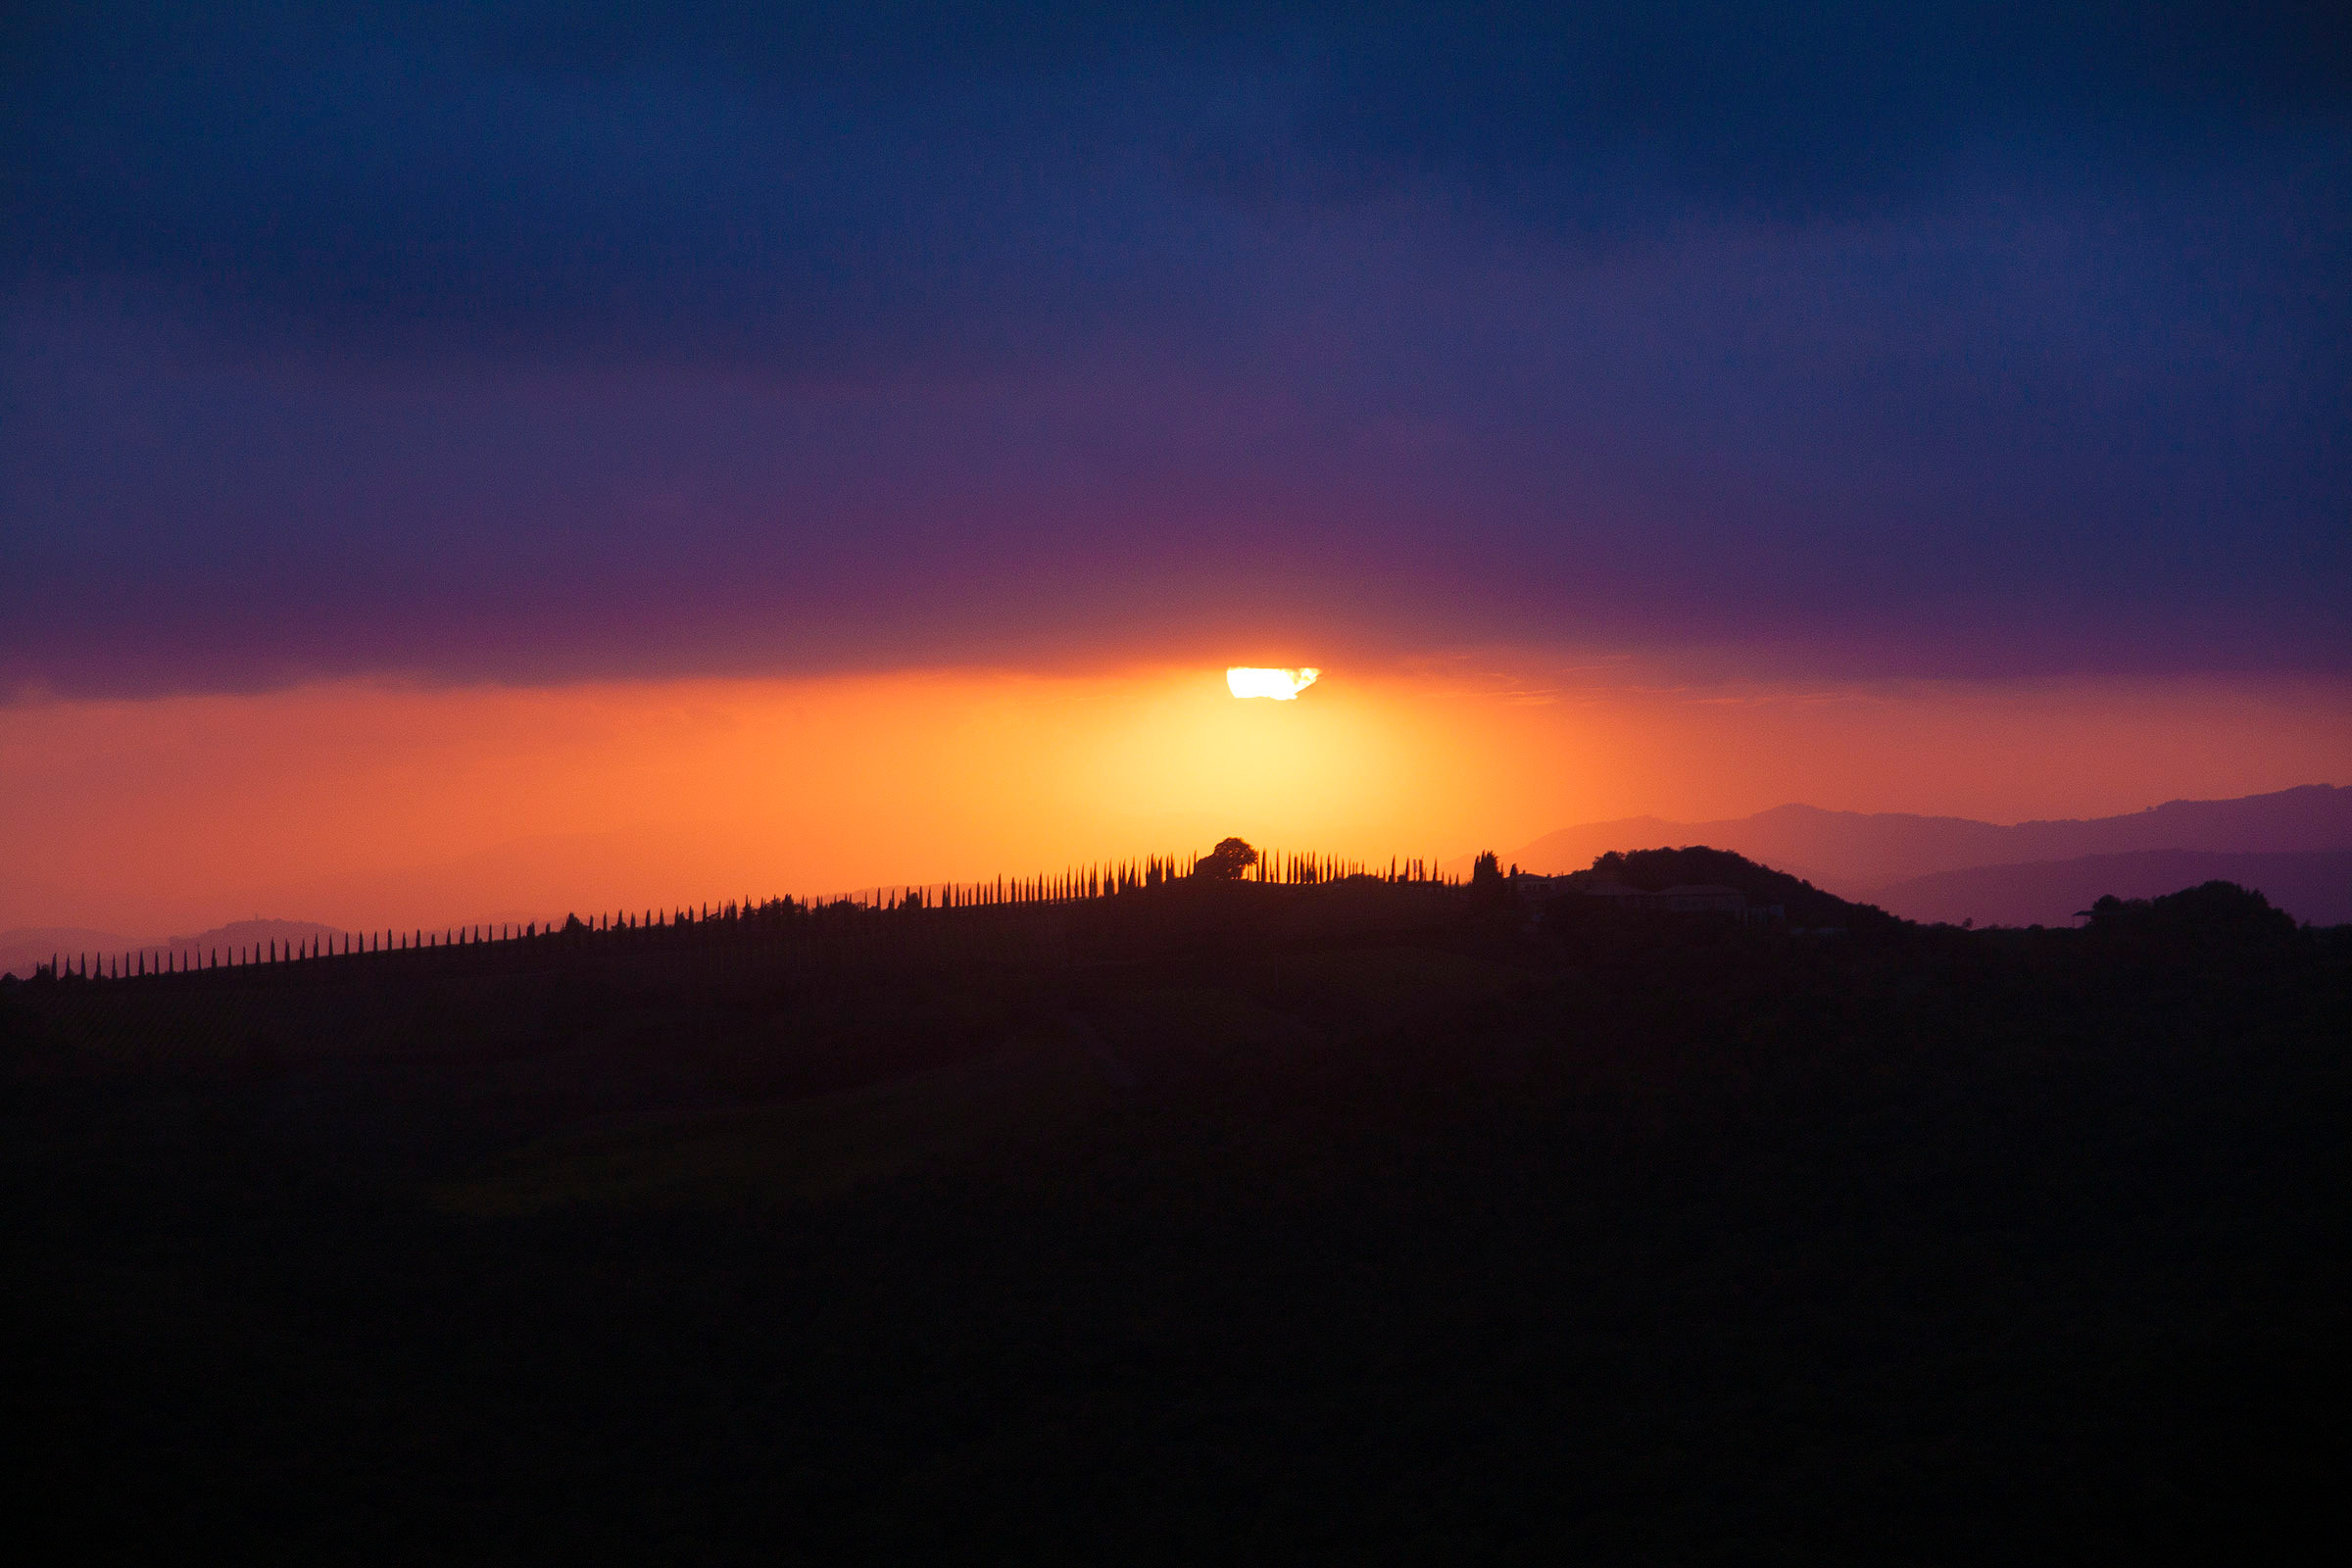 Sunset as seen from the walls of Montalcino